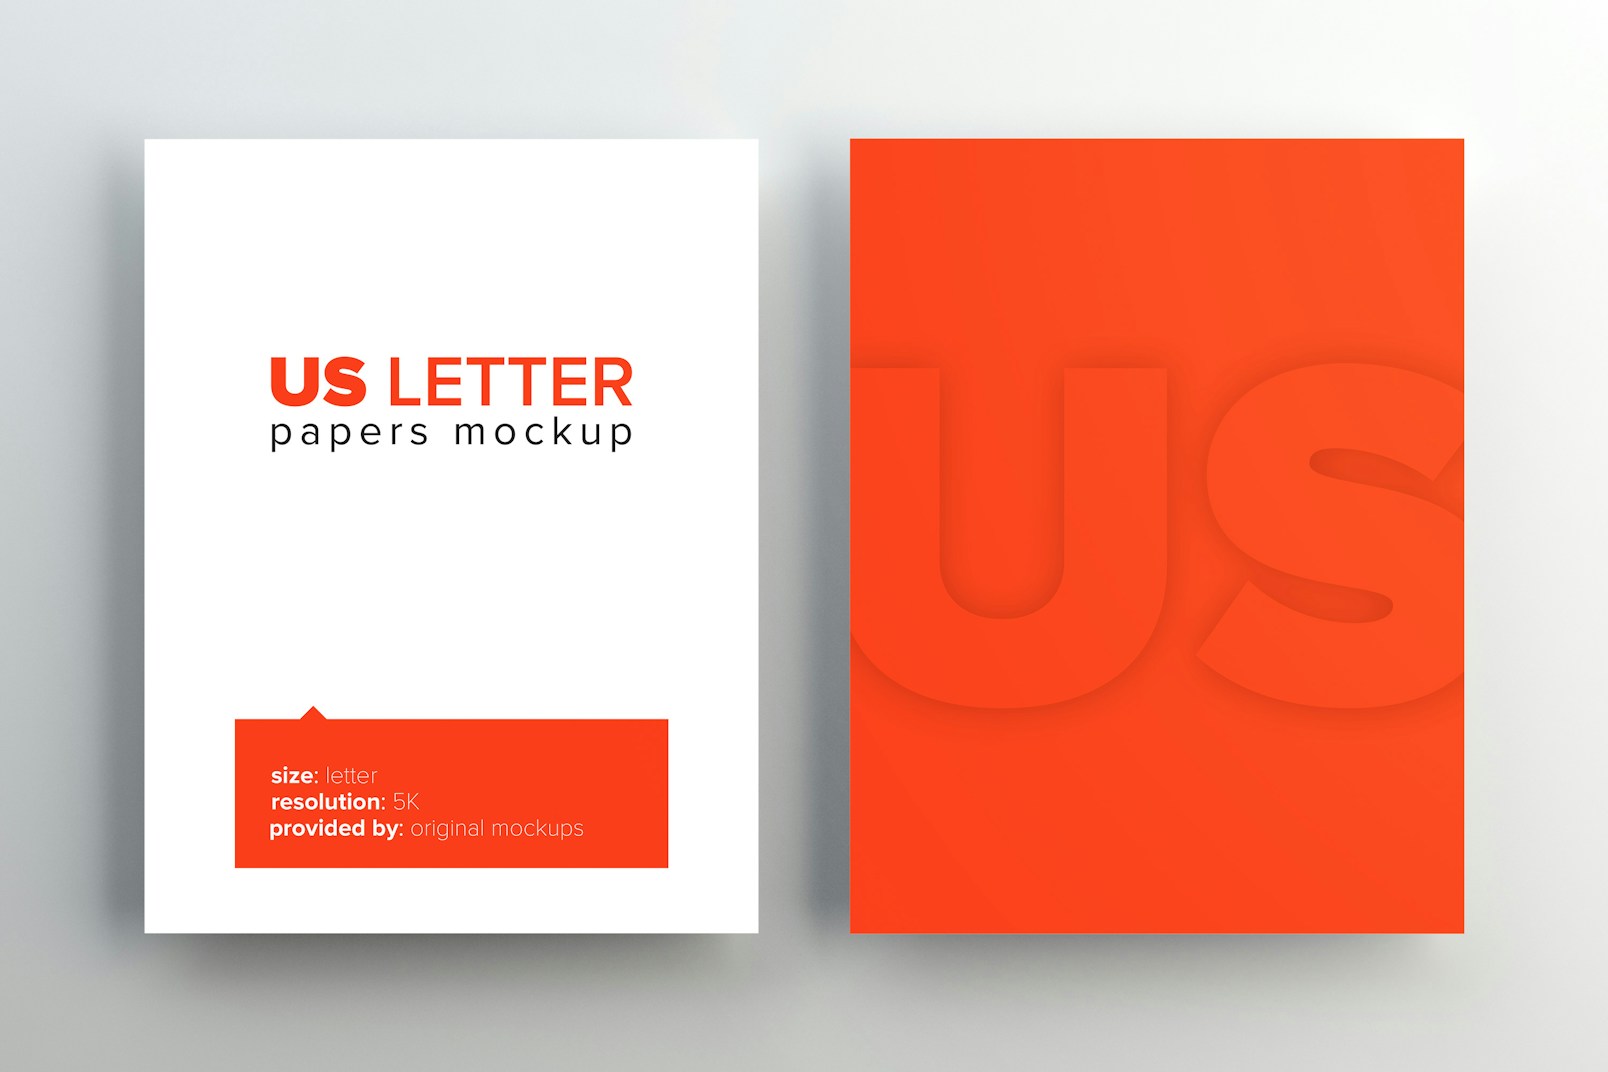 US Letter Papers Mockup